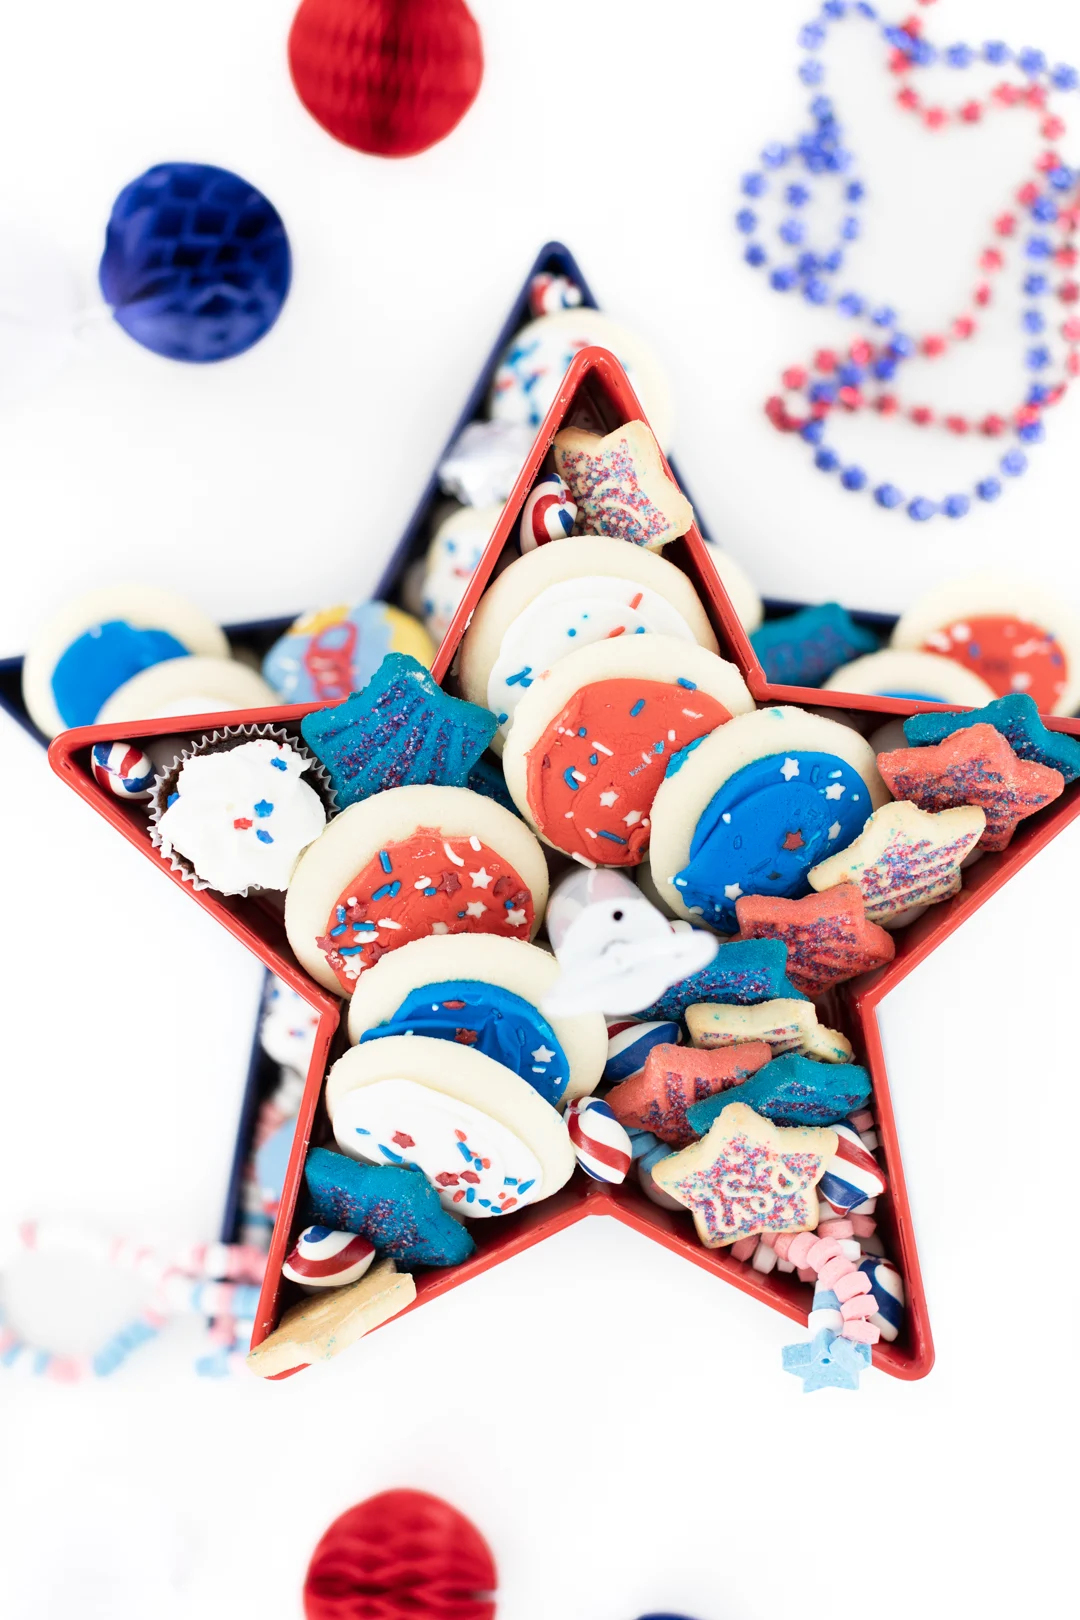 over top look at a tiered tray of patriotic themed desserts